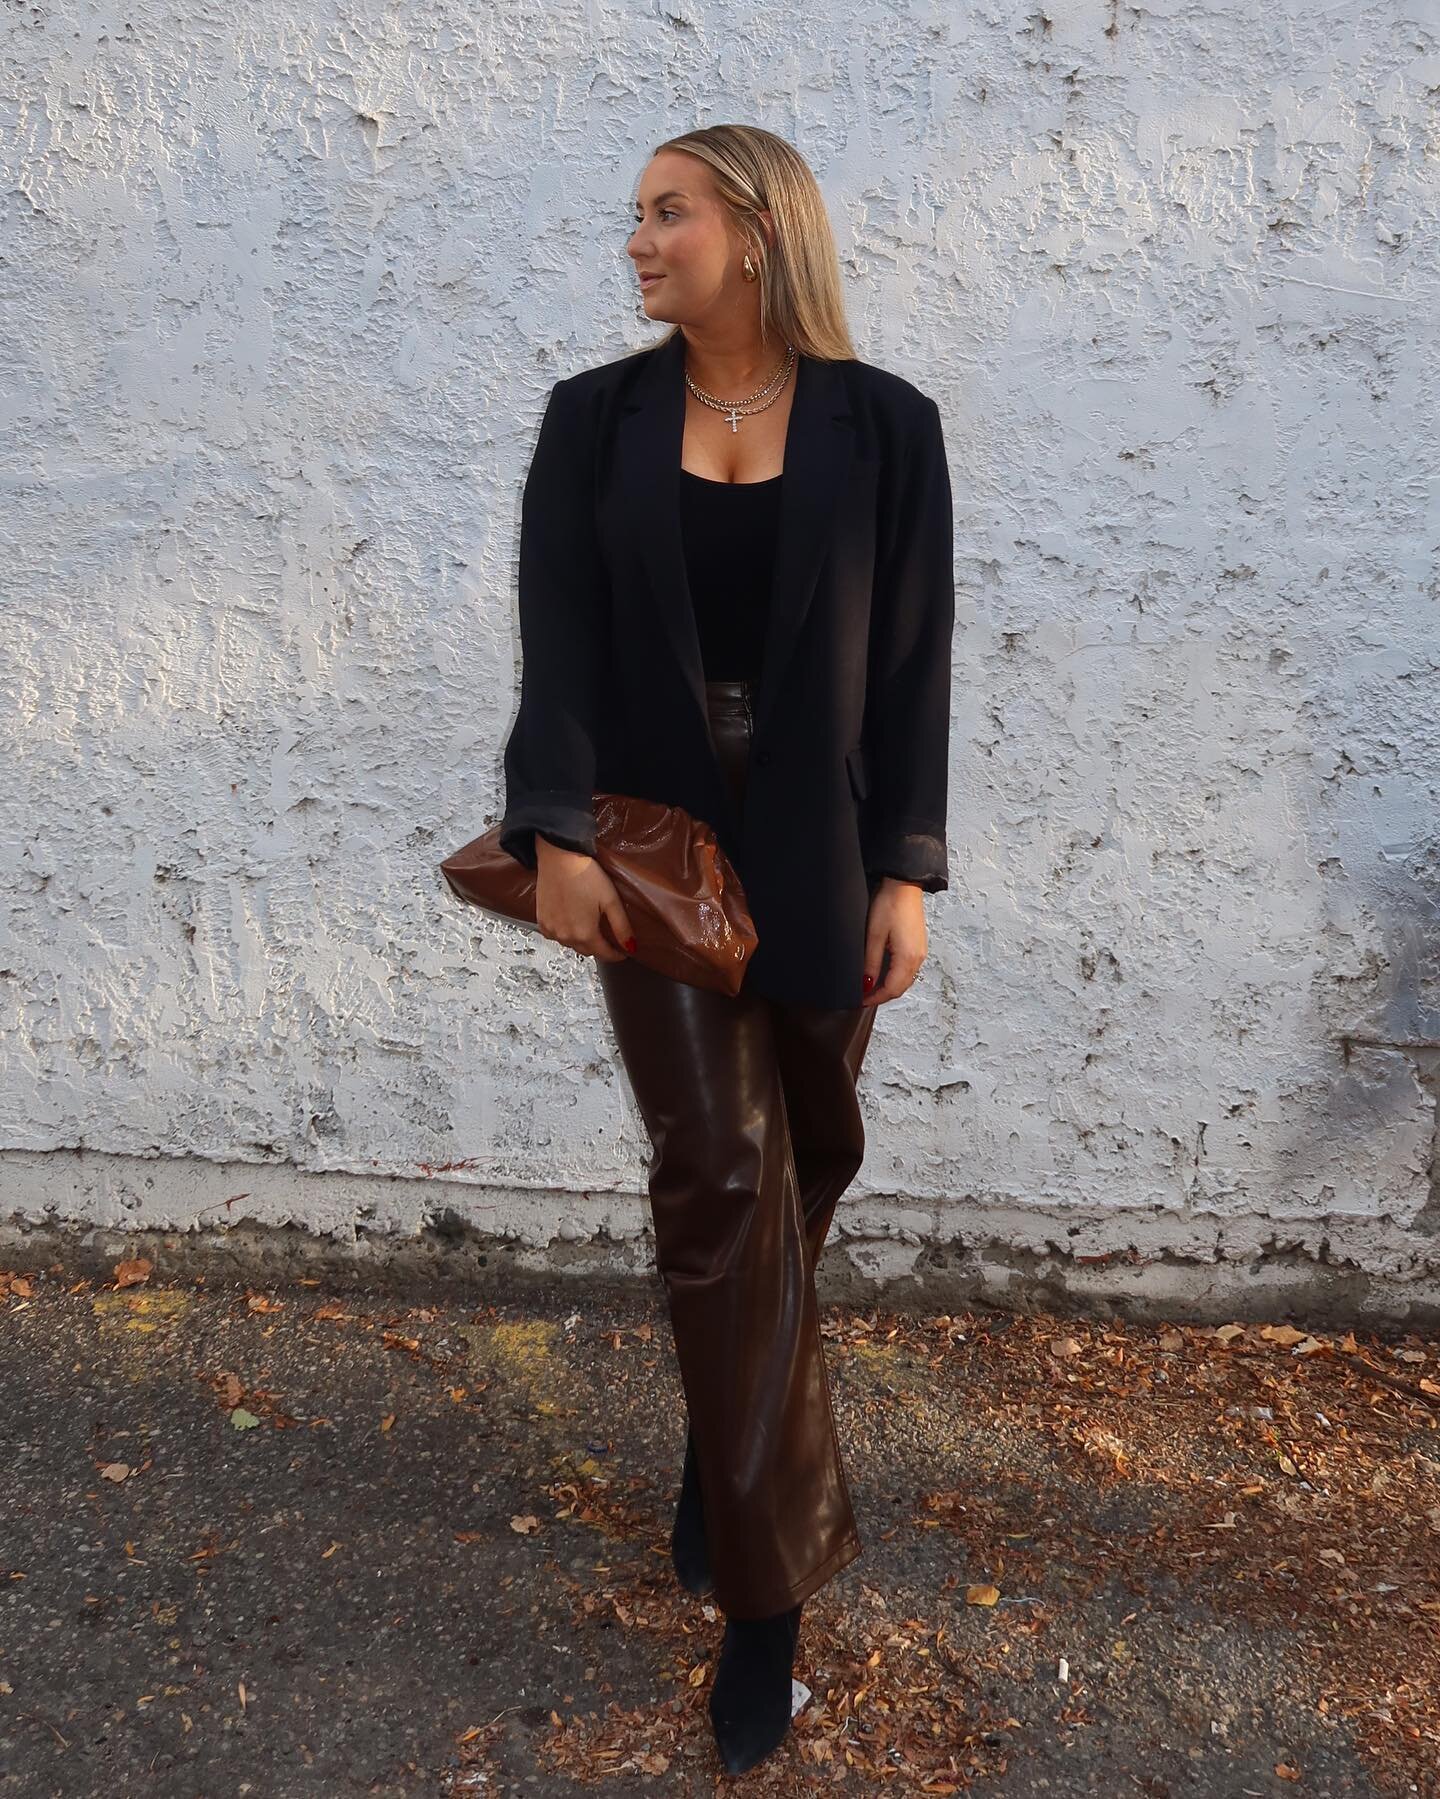 a little fall date night outfit 🖤🤎

loooove the brown leather pants from @abercrombie . They have some stretch to them making them super comfortable and is a closet staple we will be able to wear year round 👌🏻 

outfit is linked in my LTK.
.
.
.
